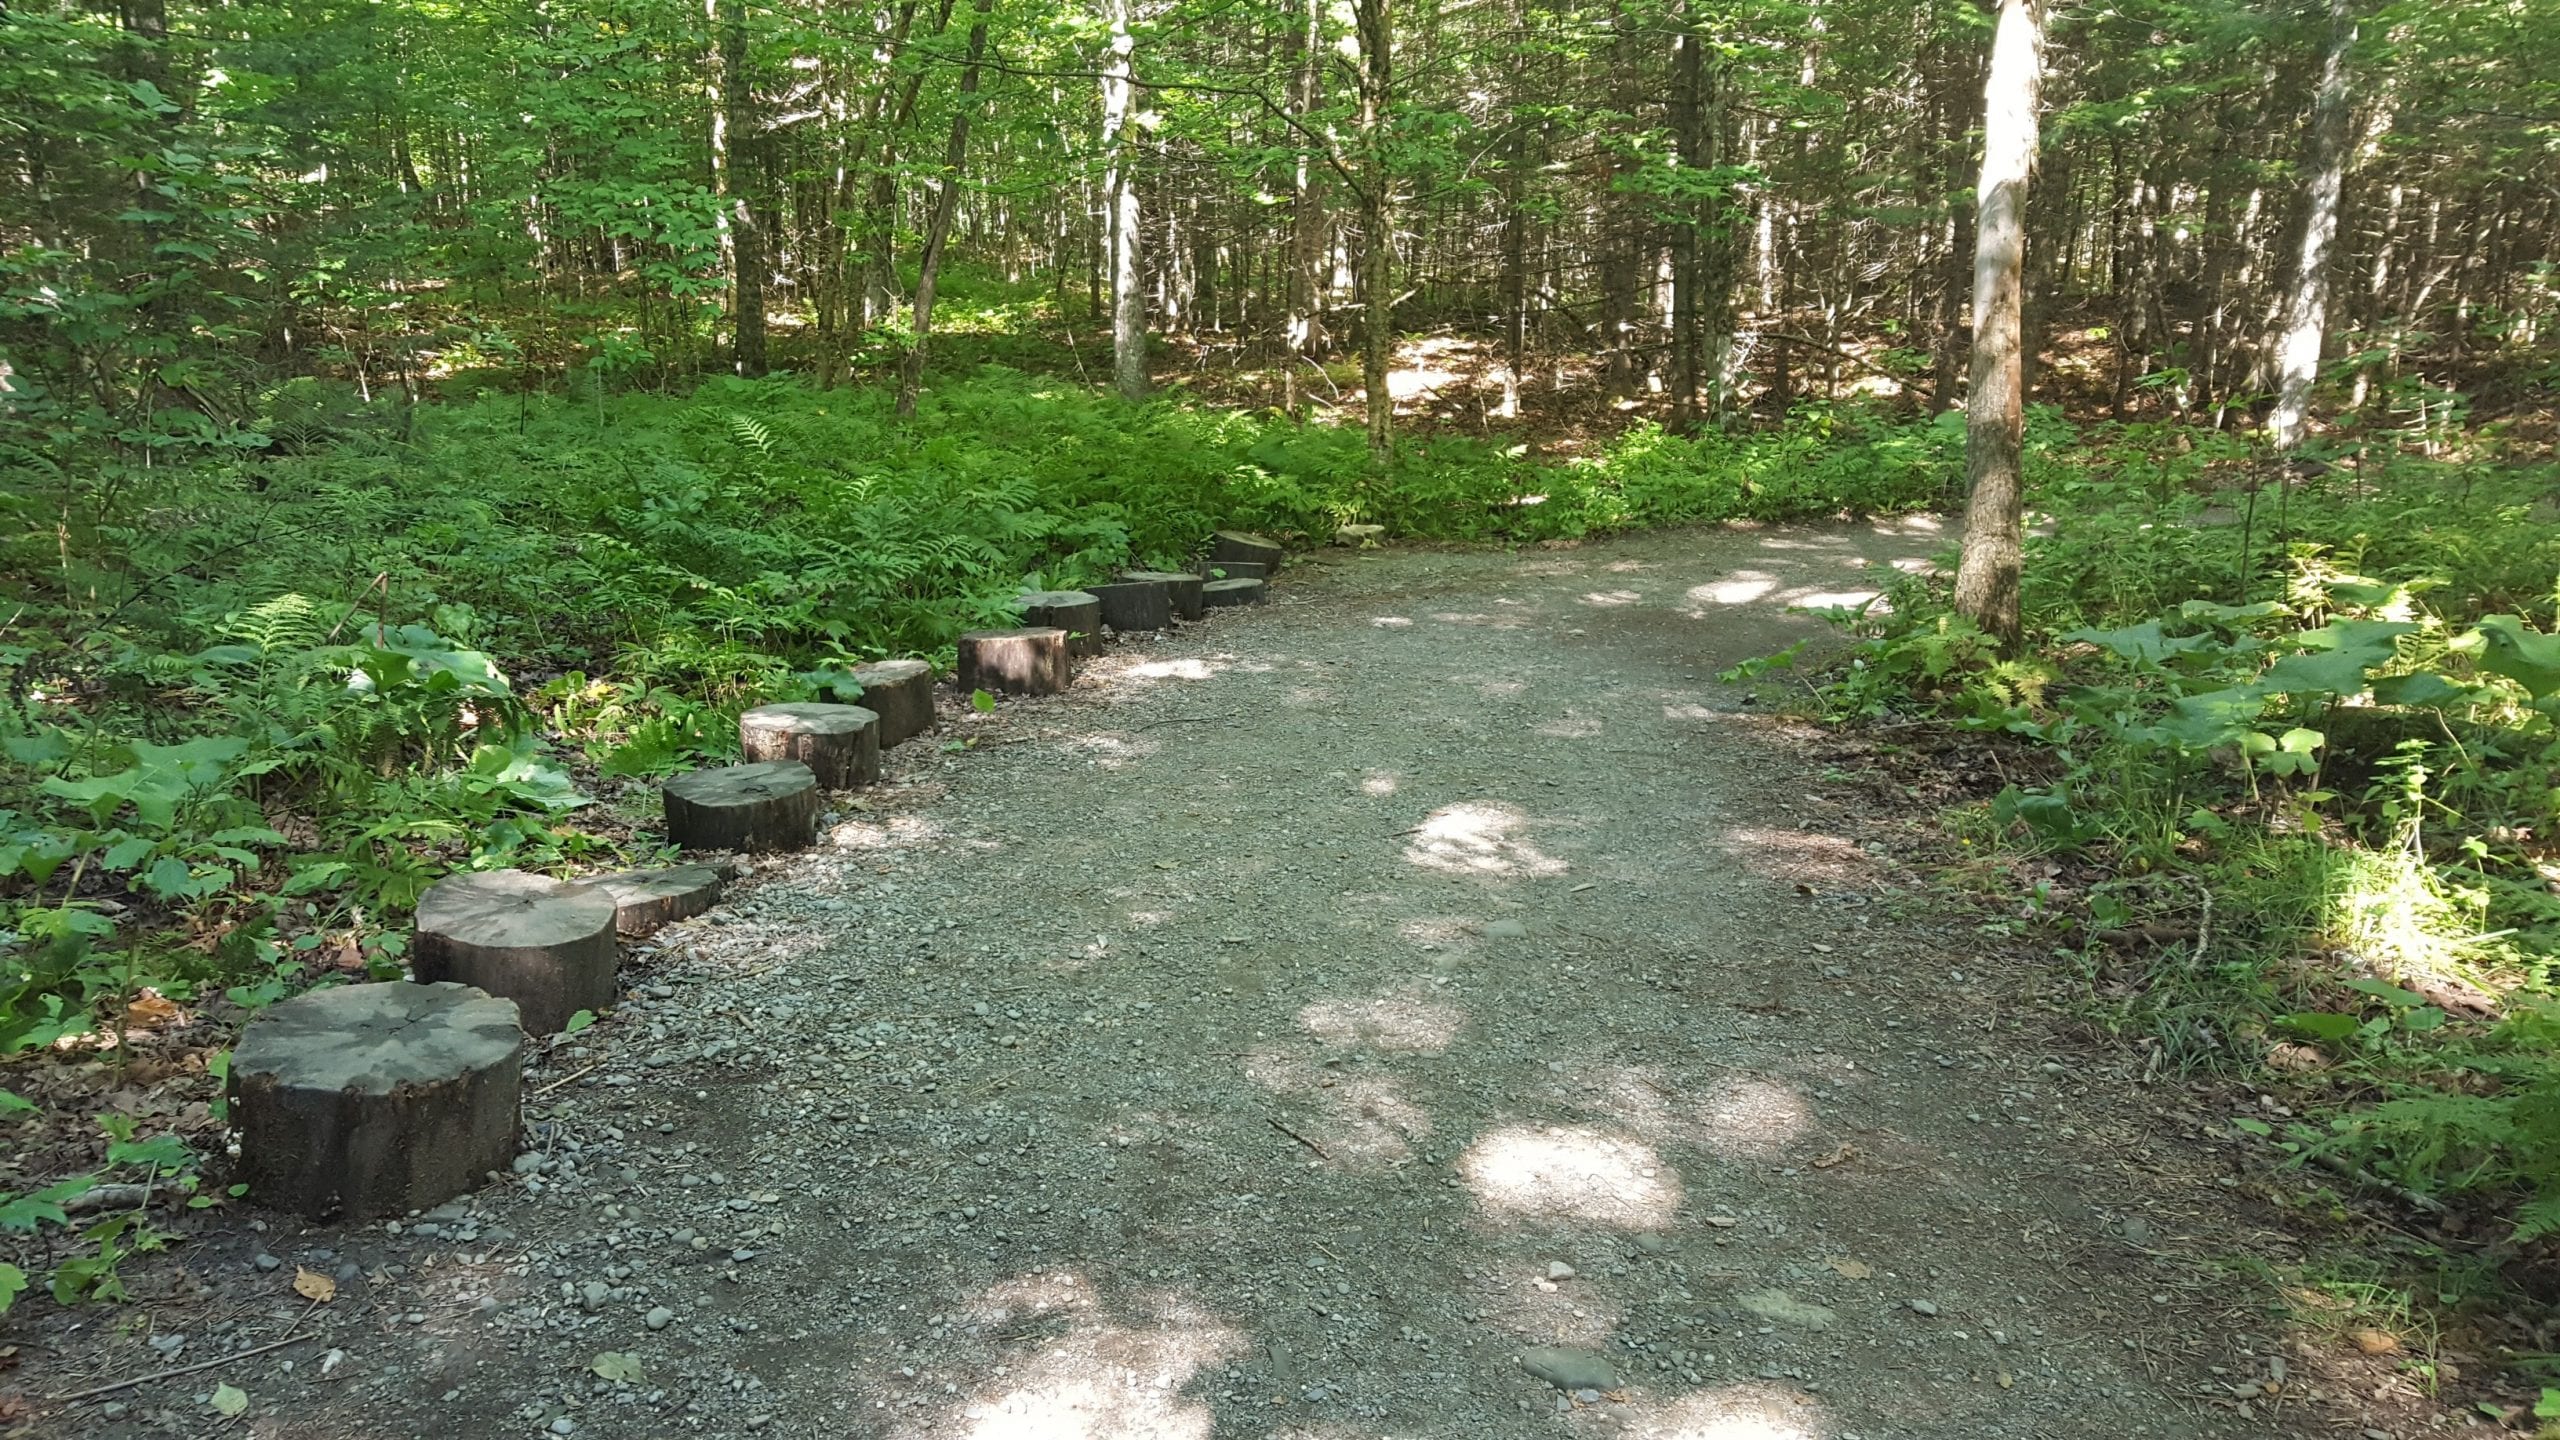 This is what a majority of the trail looks like on the way to Moxie Falls. Wide, flat, and well-maintained.